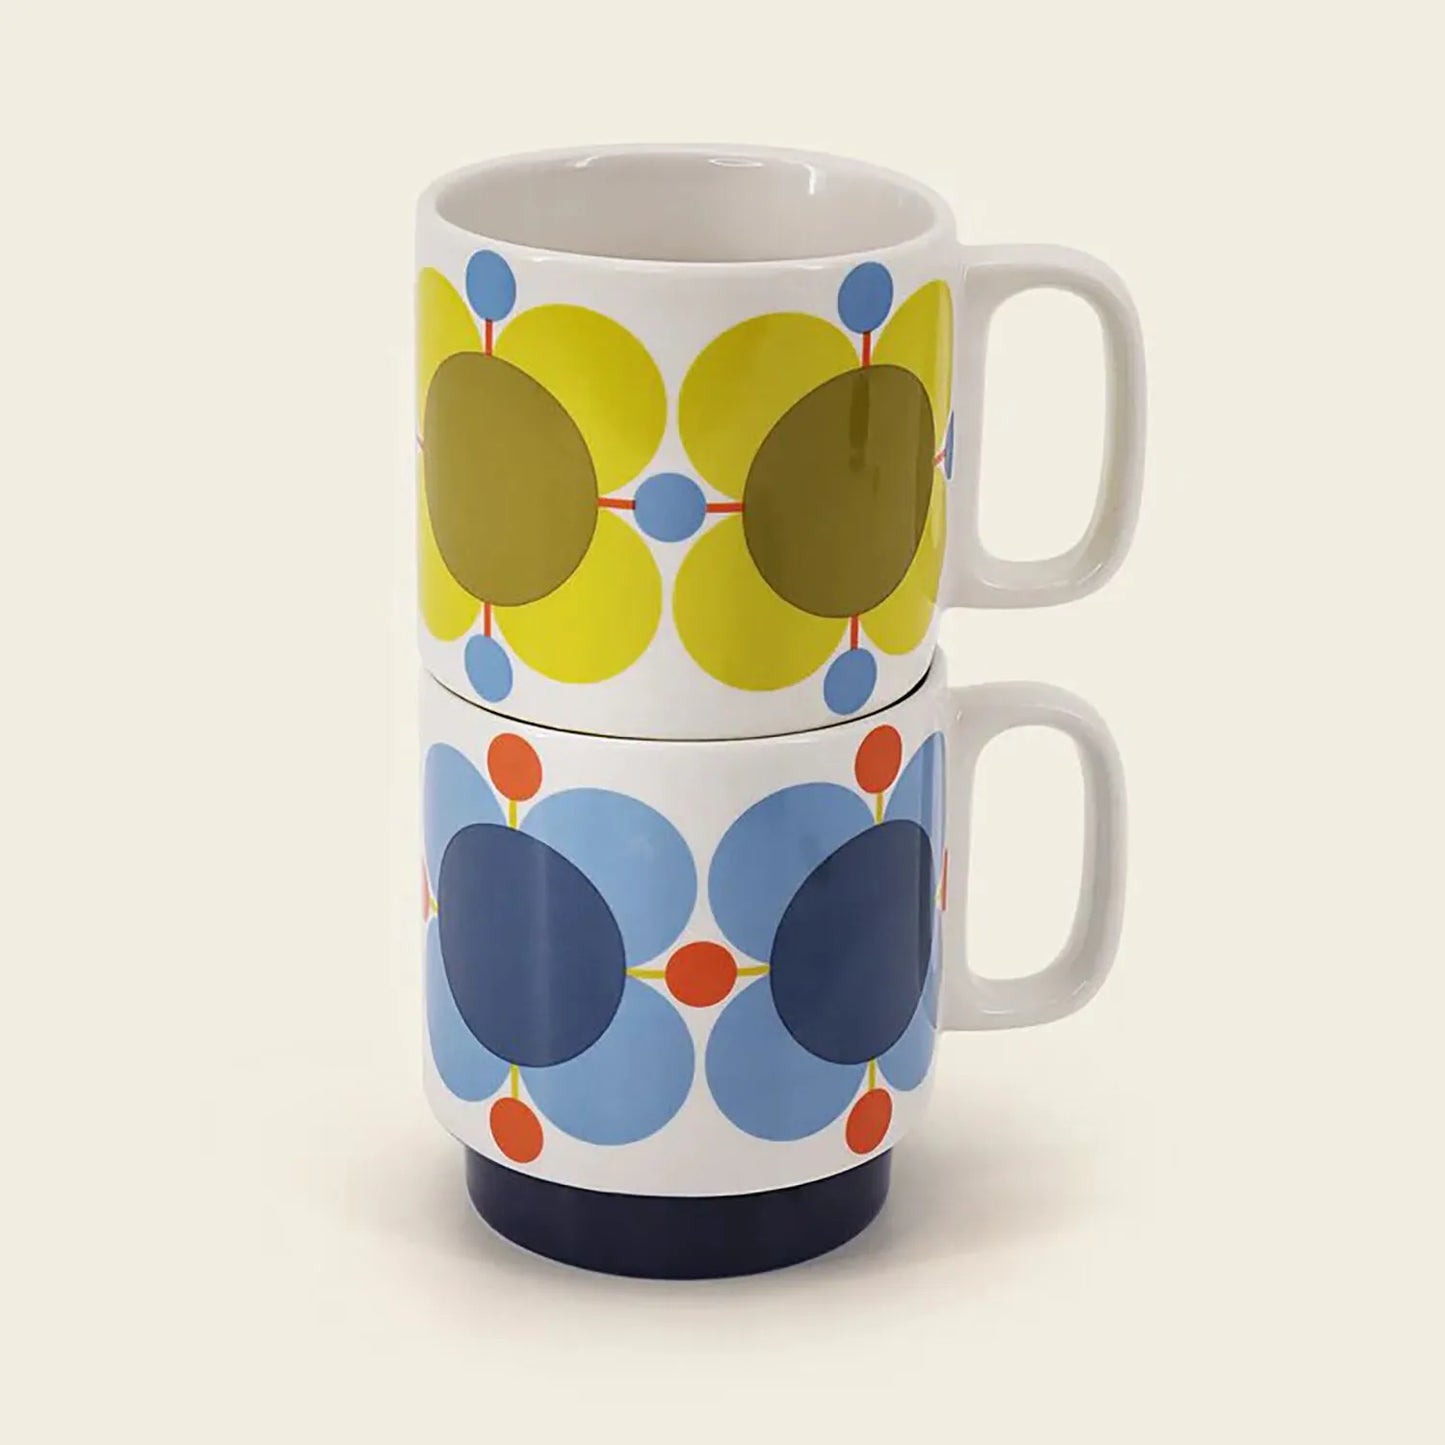 Orla Kiely Atomic flower stackable mugs set of 2 in sky and sunflower 